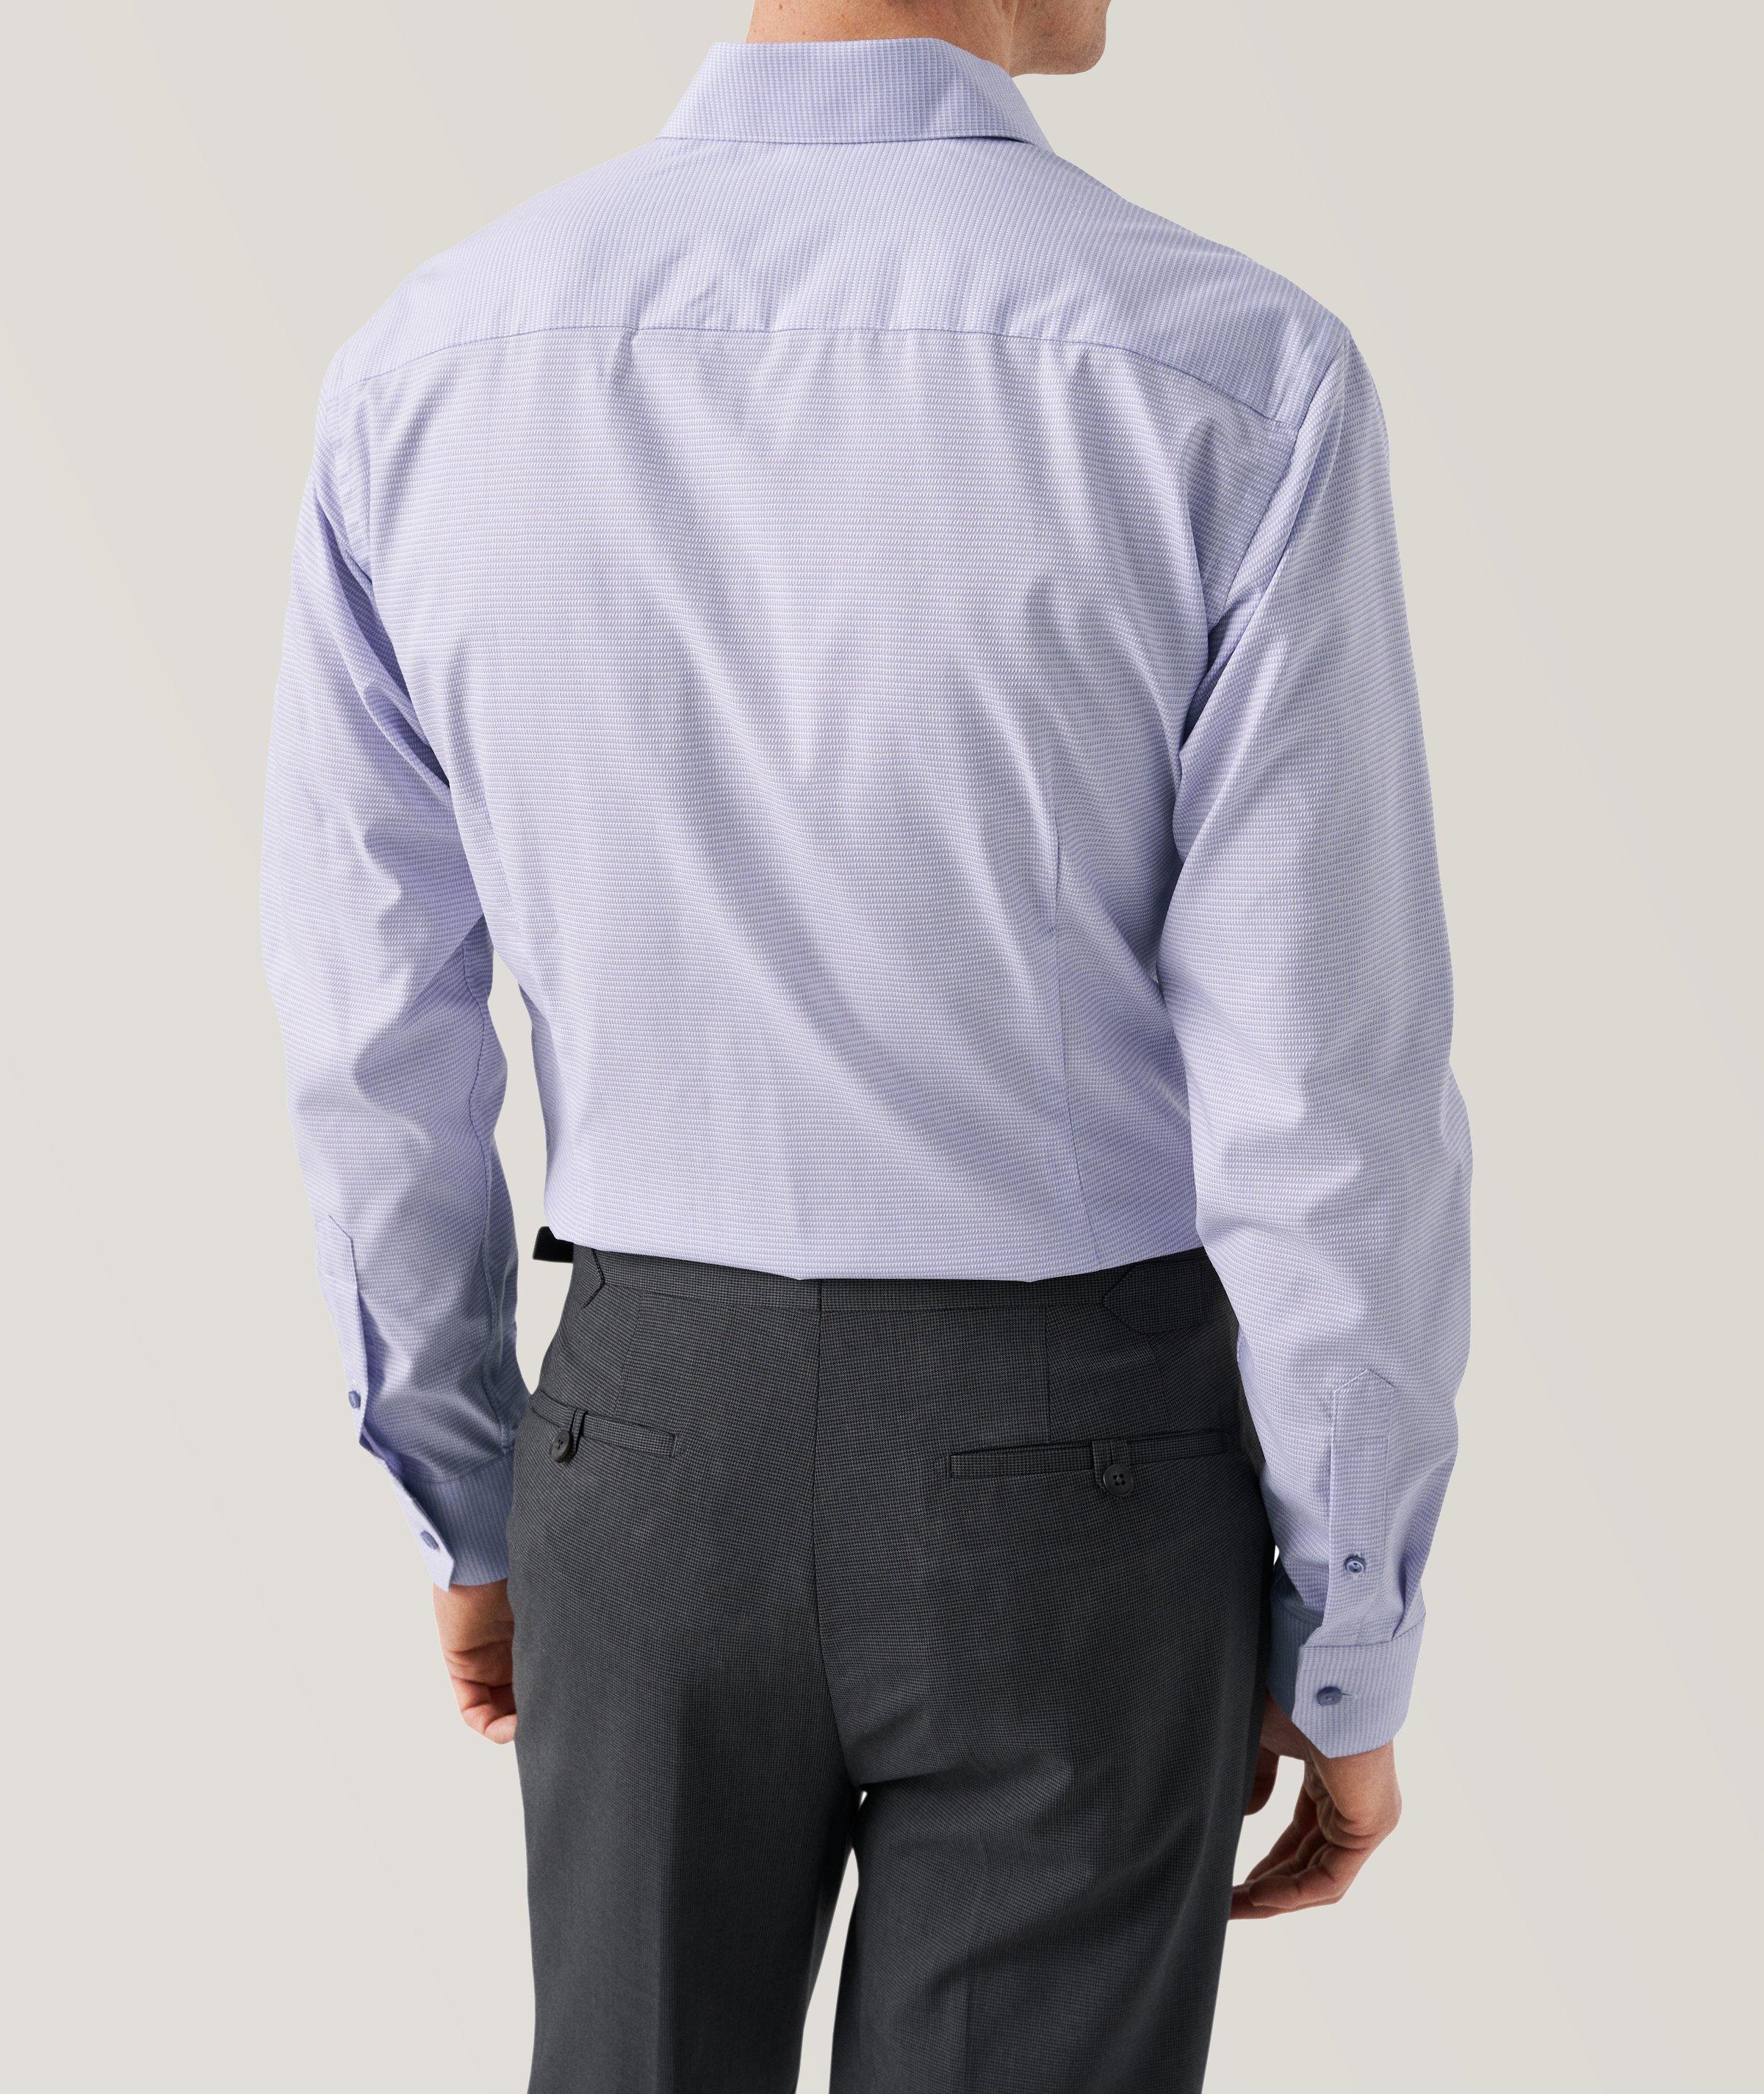 Elevated Collection Pique Dress Shirt image 3